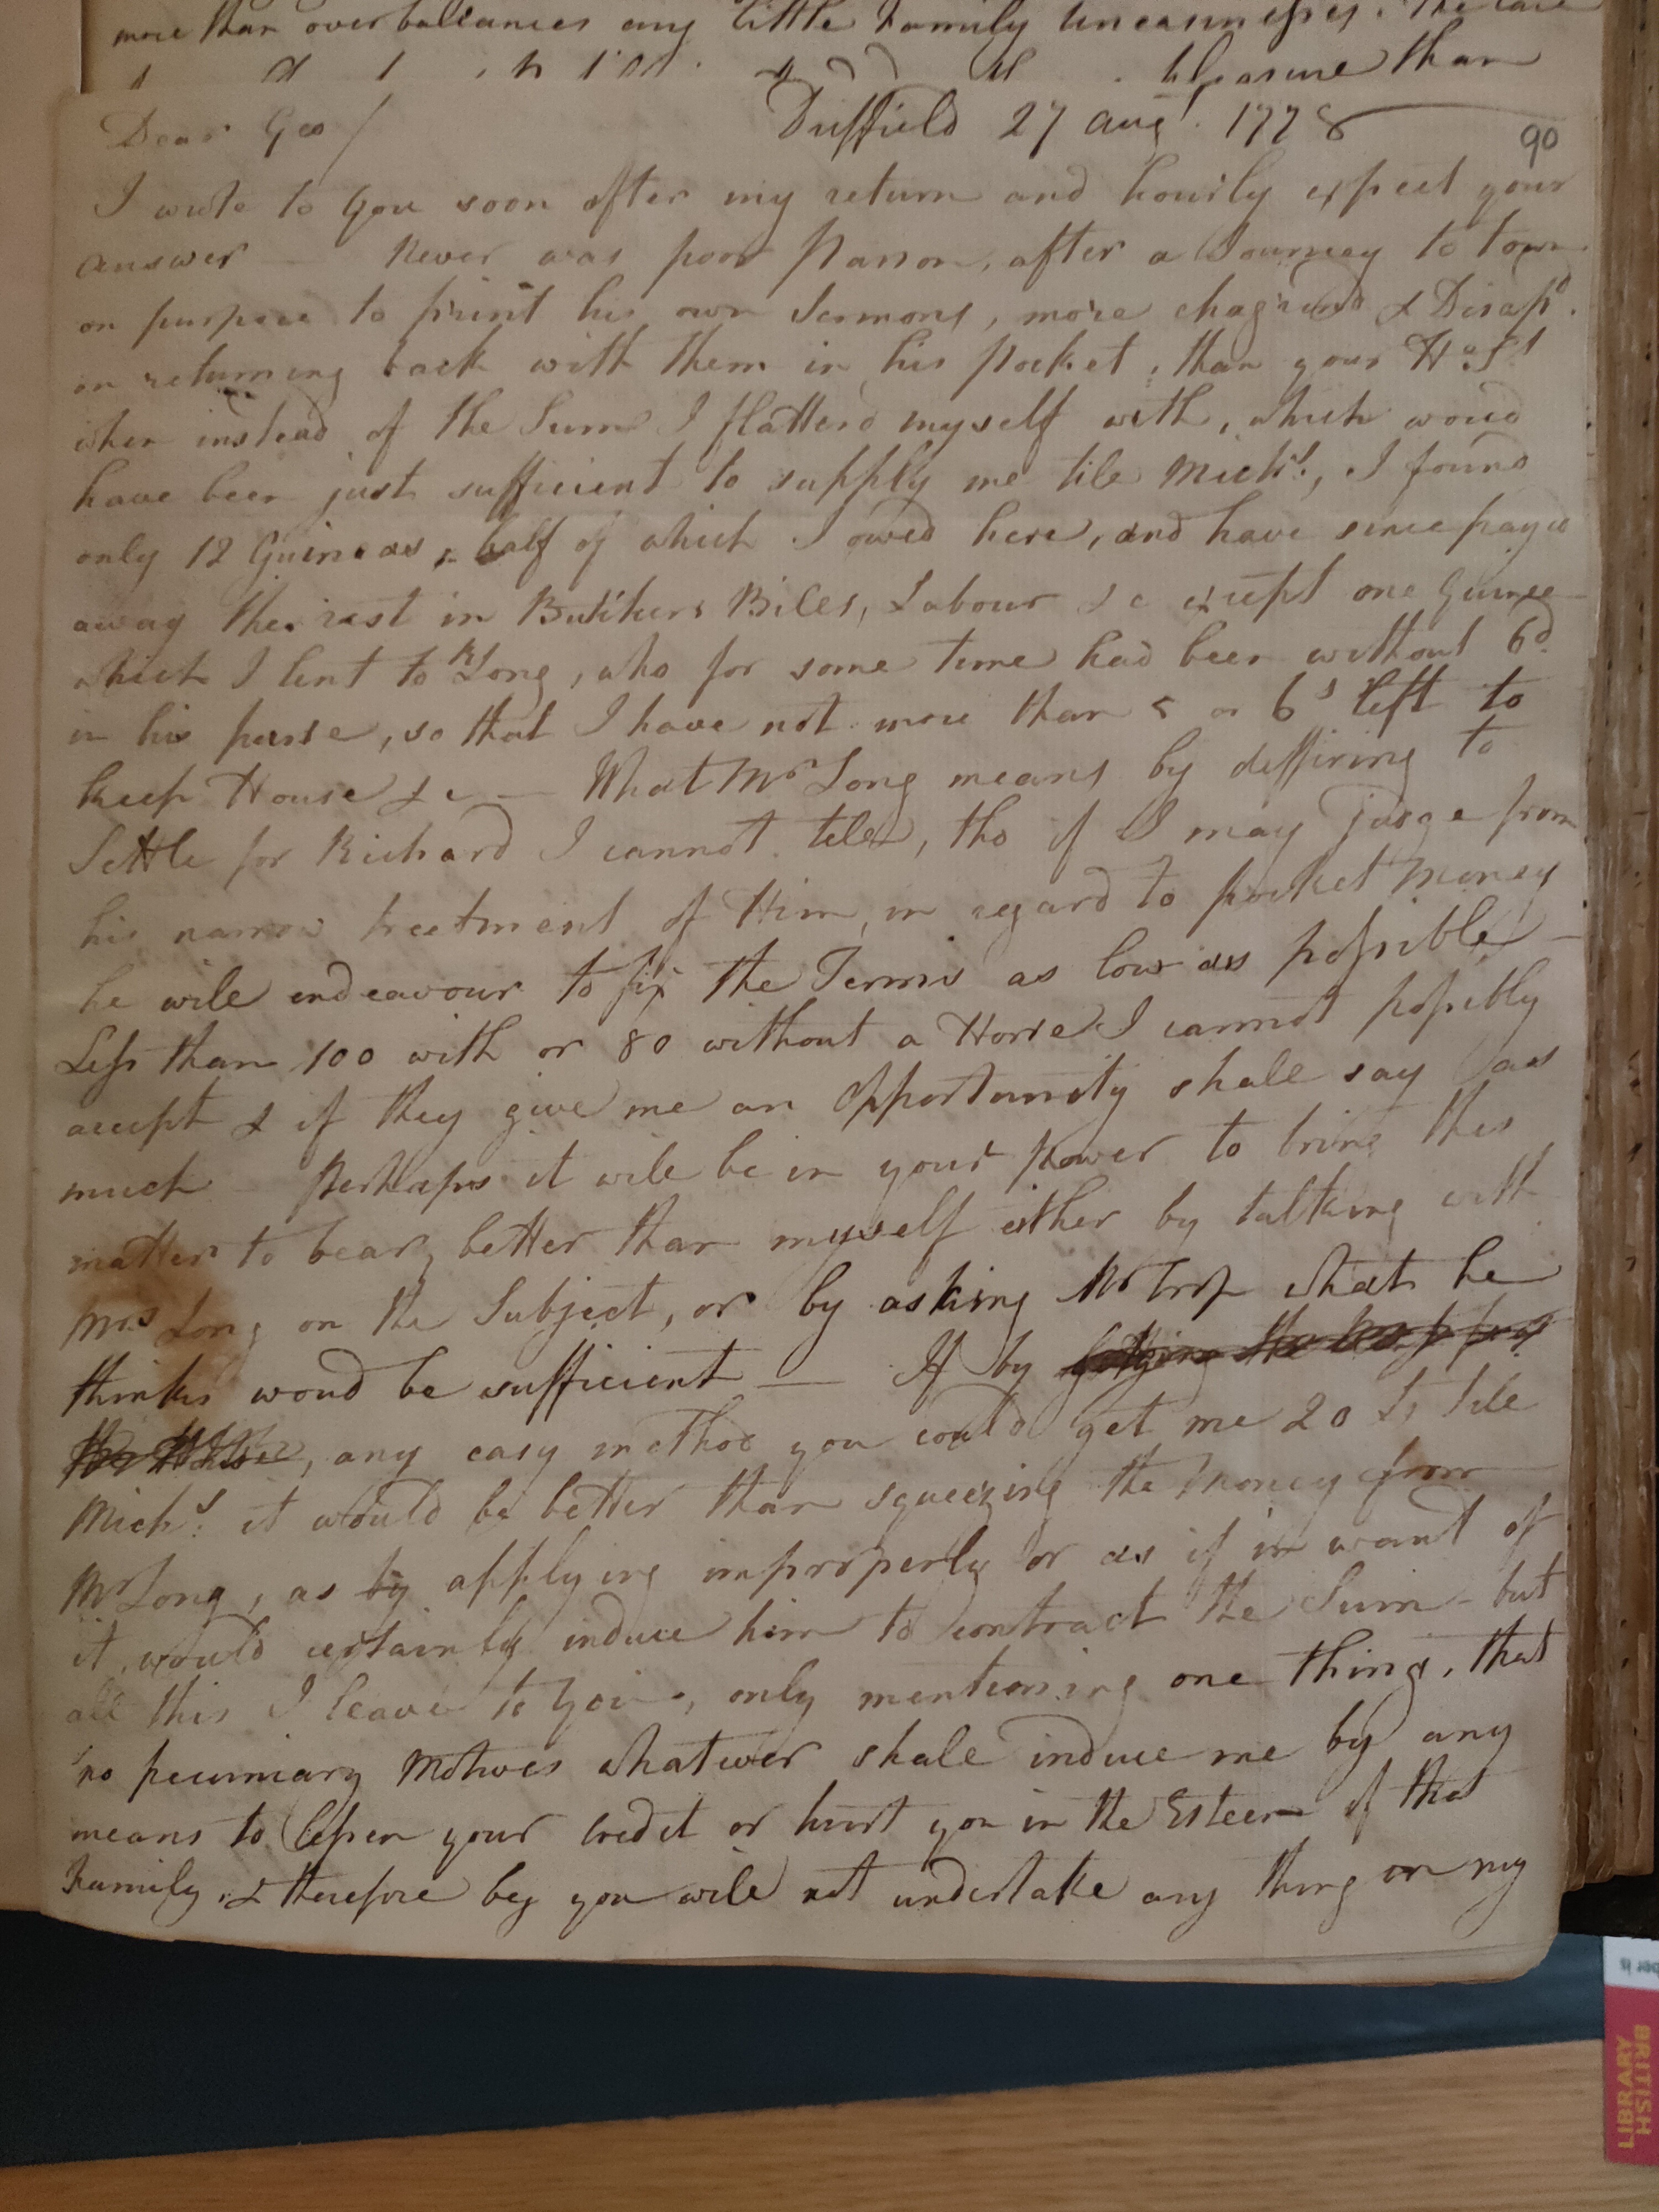 Image #1 of letter: Revd Richard Cumberland to George Cumberland, 27 August 1778